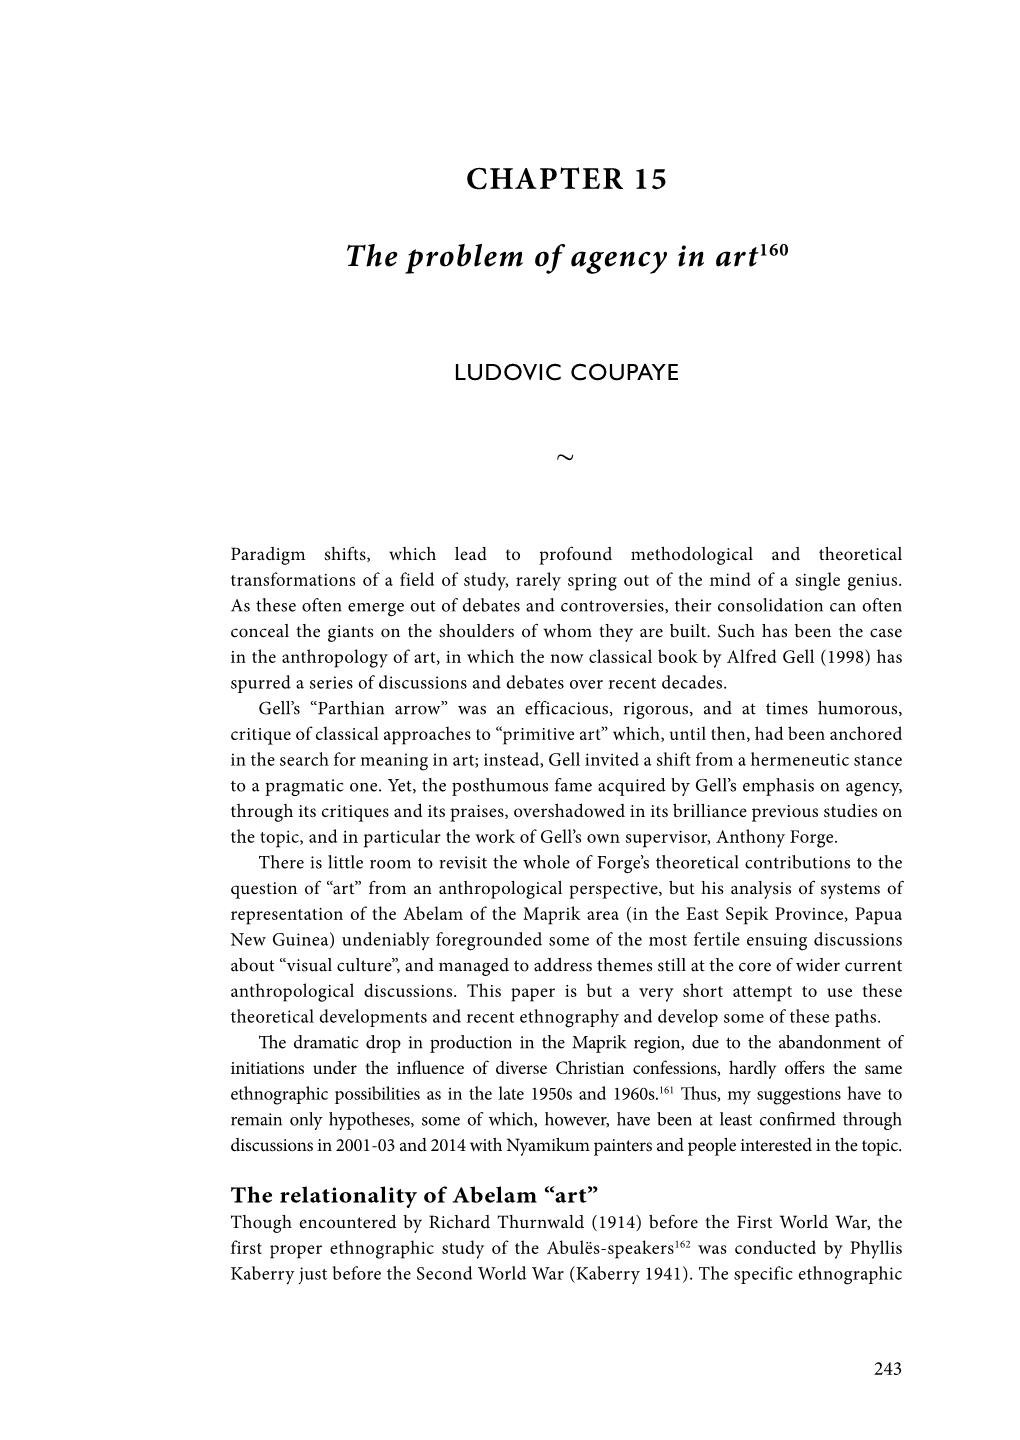 CHAPTER 15 the Problem of Agency in Art160